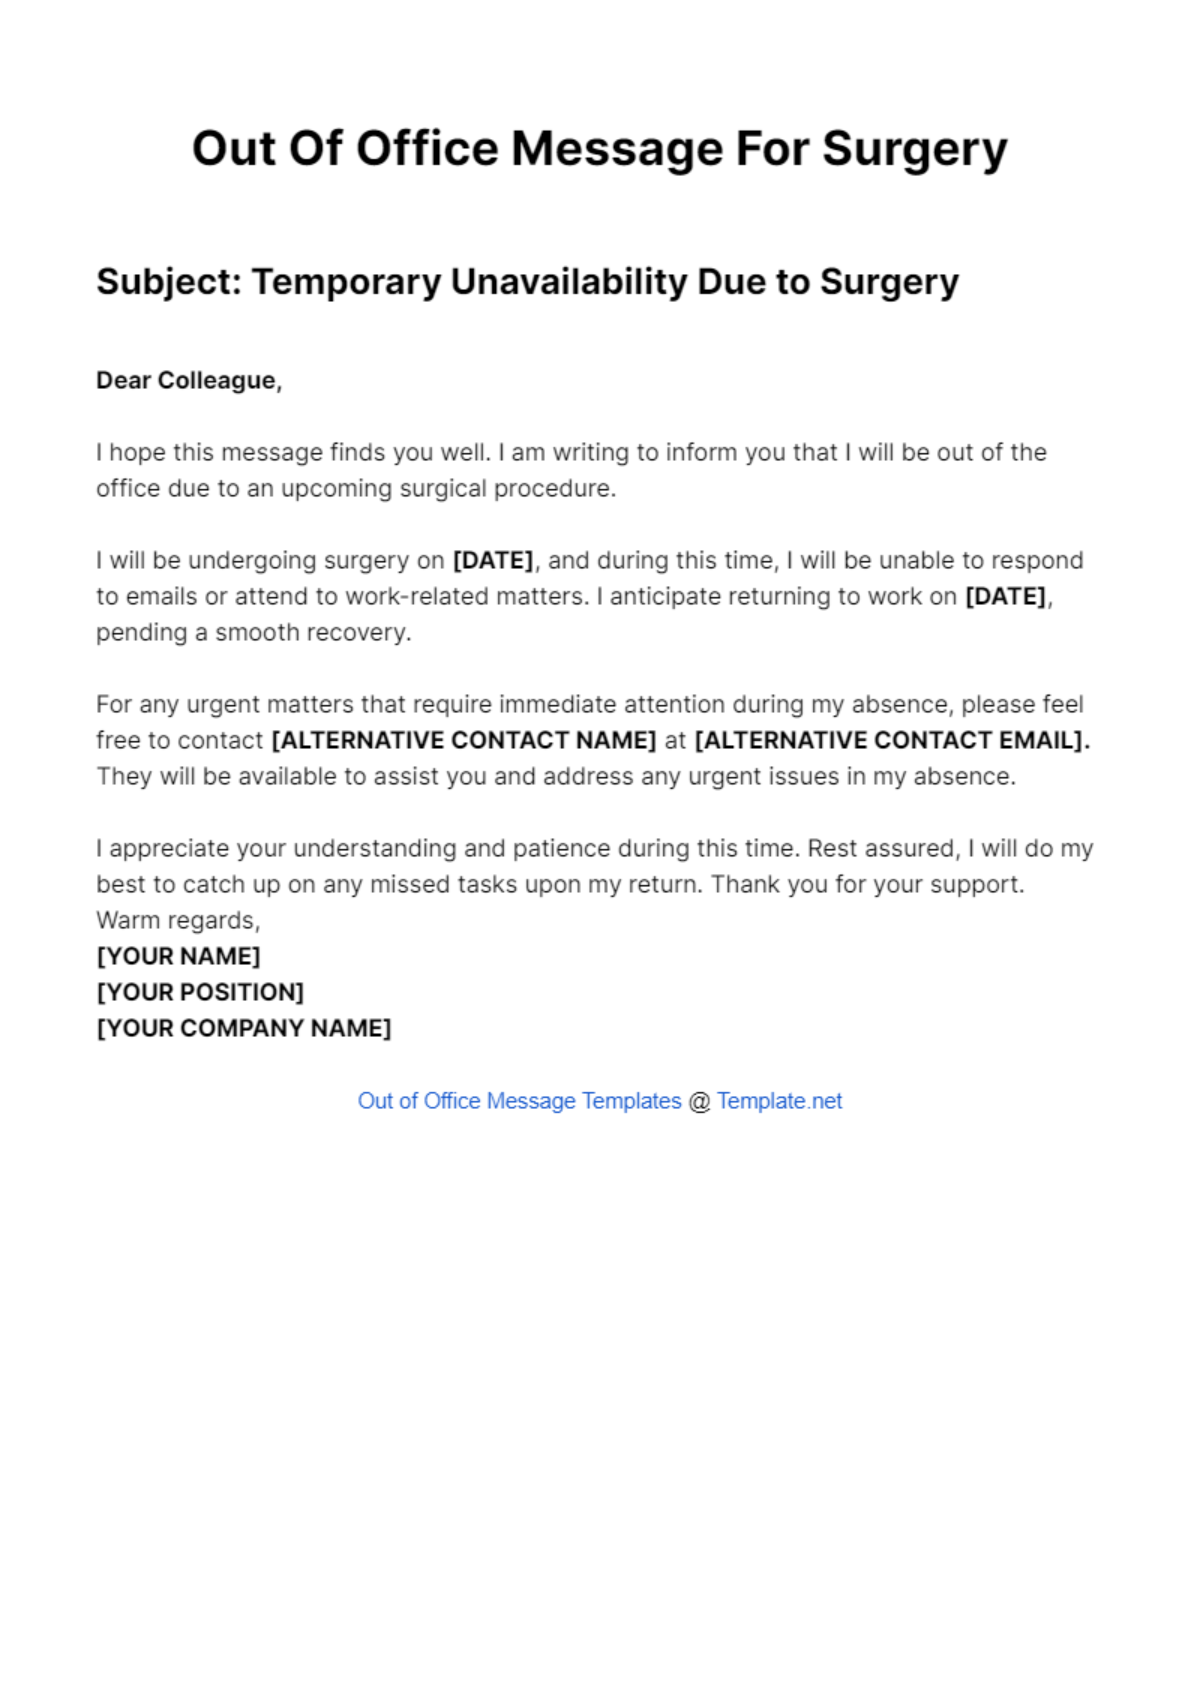 Out Of Office Message For Surgery Template